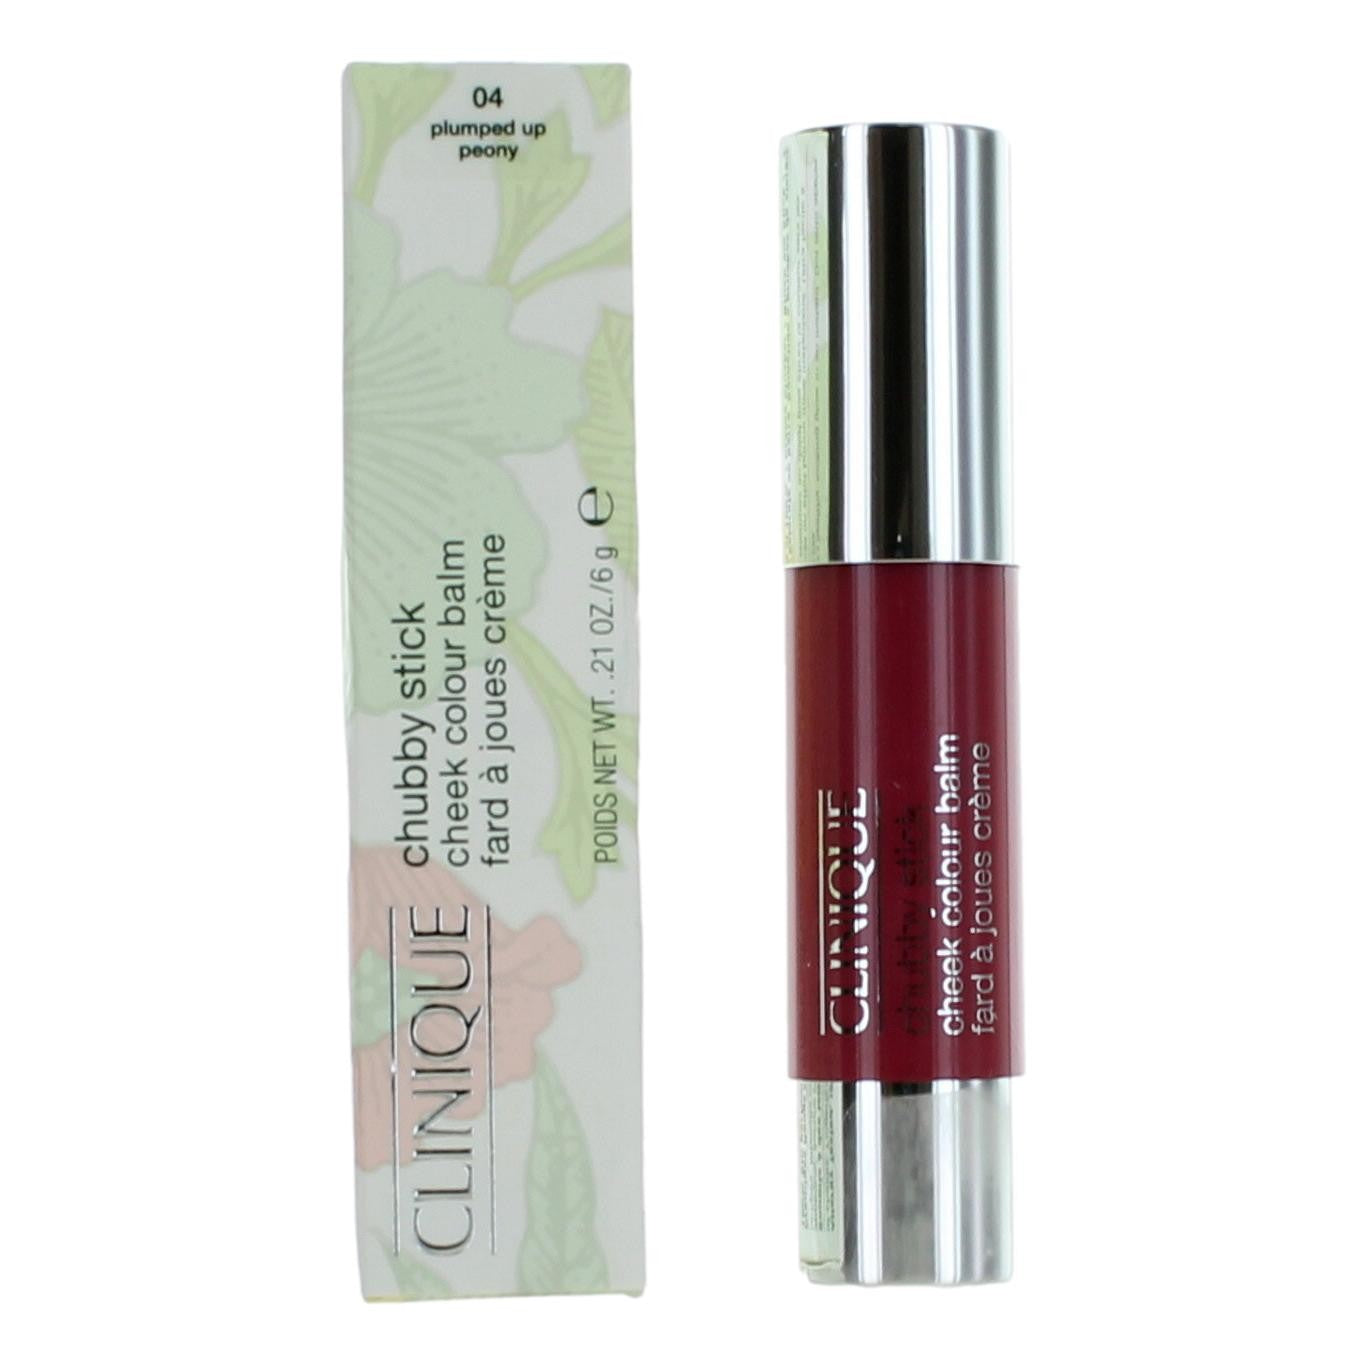 Clinique Chubby Stick by Clinique, .21oz Cheek Colour Balm - 04 Plumped Up Peony - 04 Plumped Up Peony